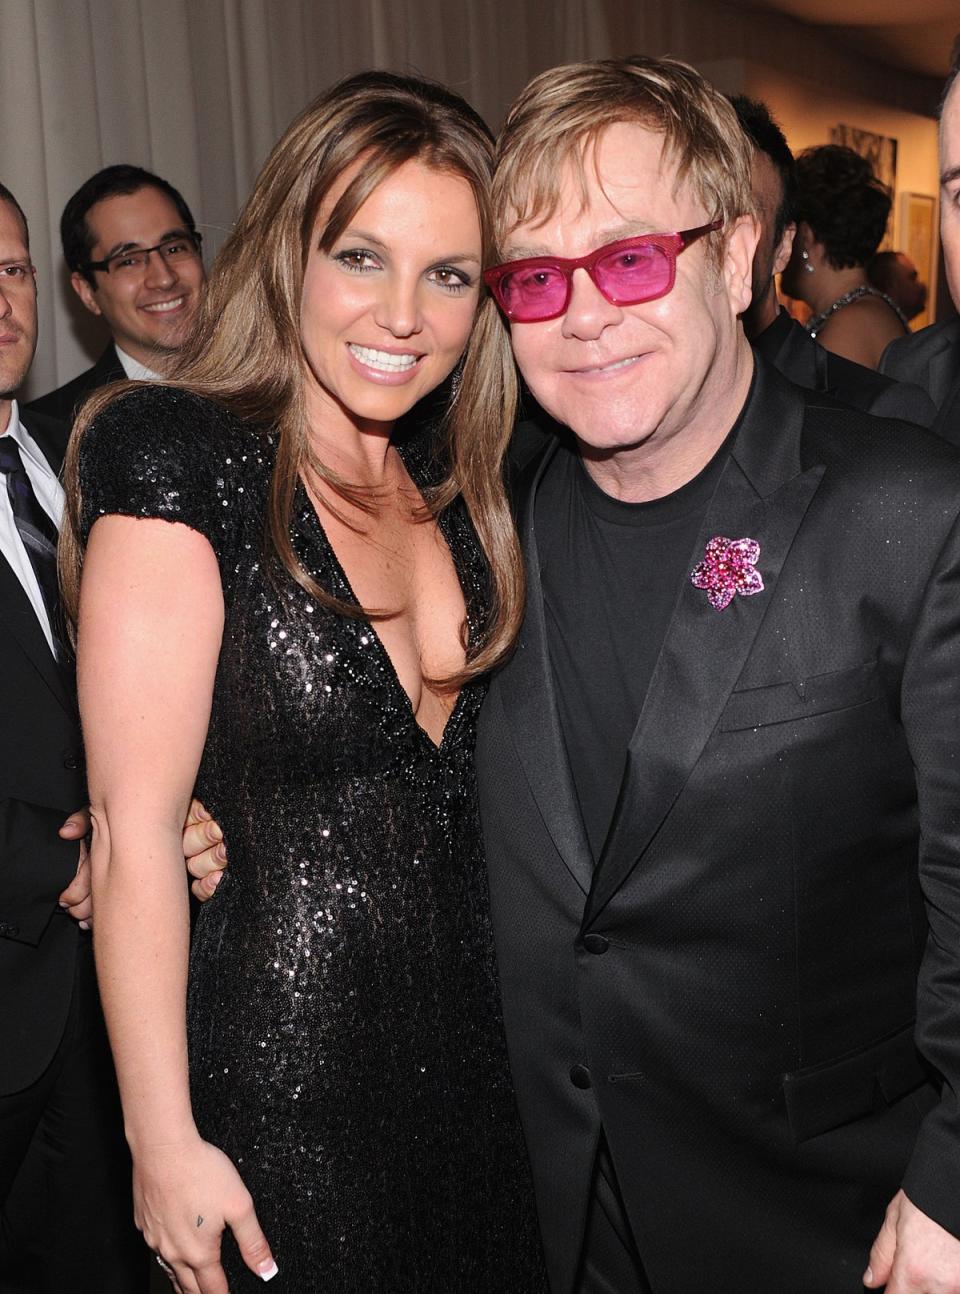 Spears collaborated with Sir Elton John last year on Hold Me Closer. Pictured together in 2013 (Getty Images for EJAF)